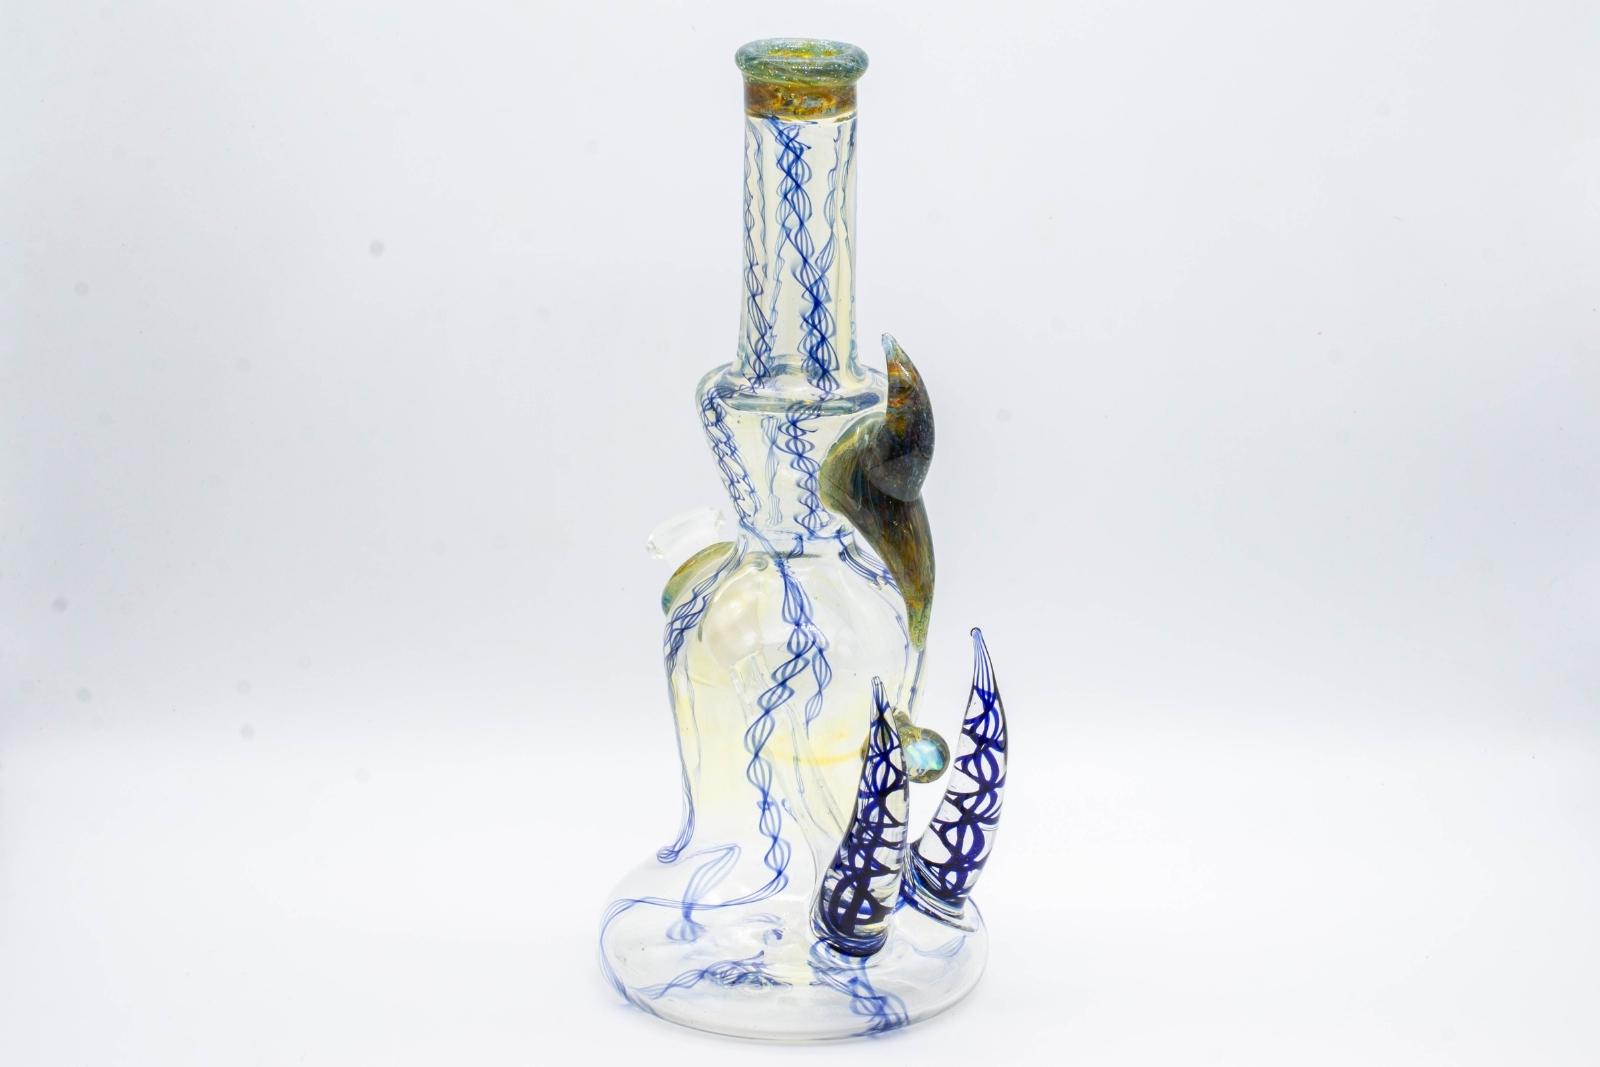 A silver and cobalt 8-inch glass rig, made by Bradfurd Glass, on a white background